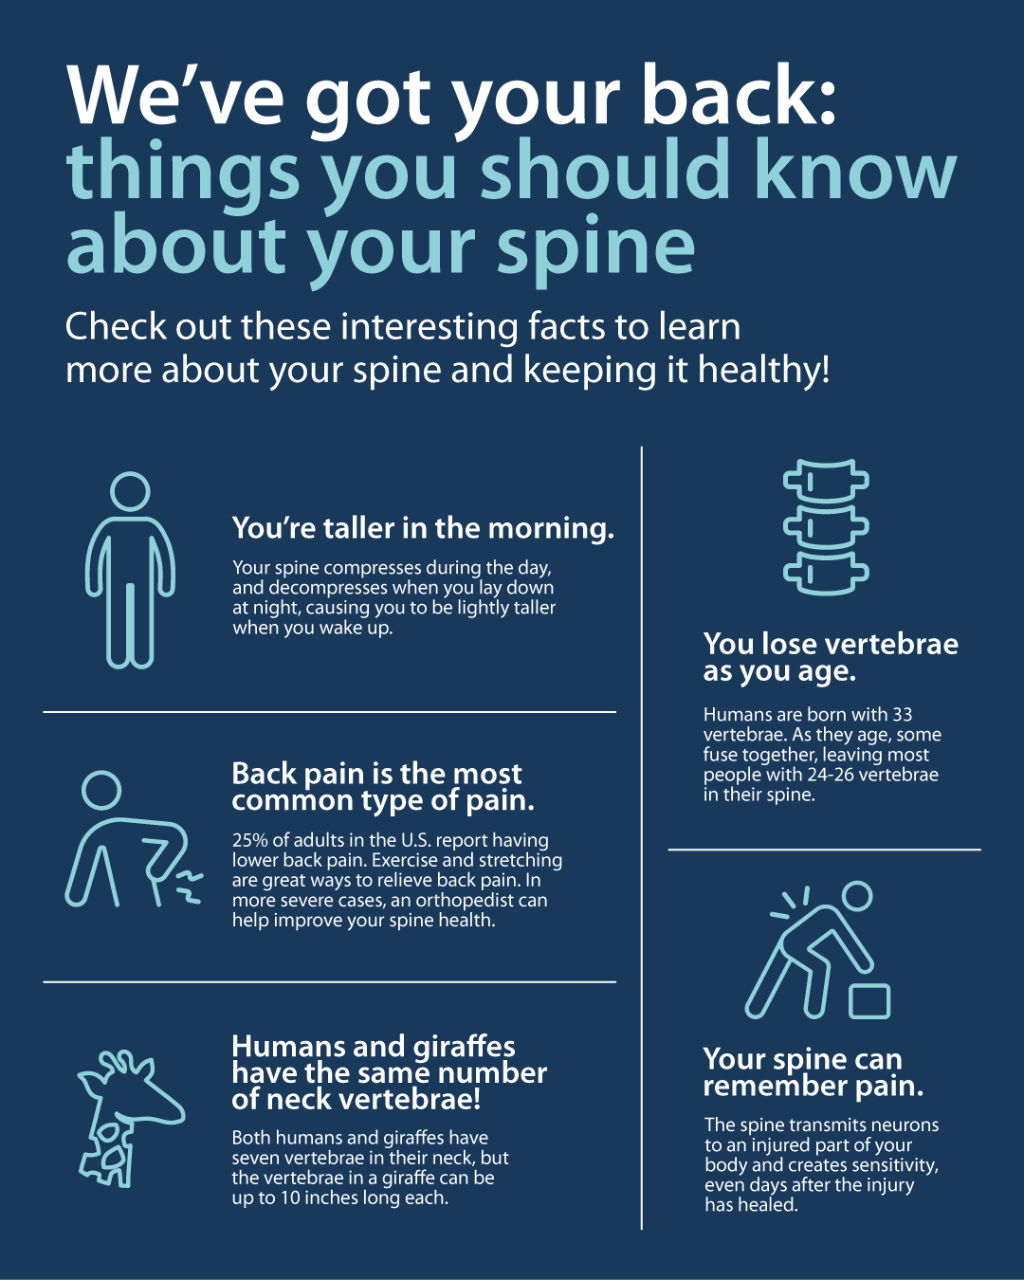 Infographic explaining 5 things to know about your spine